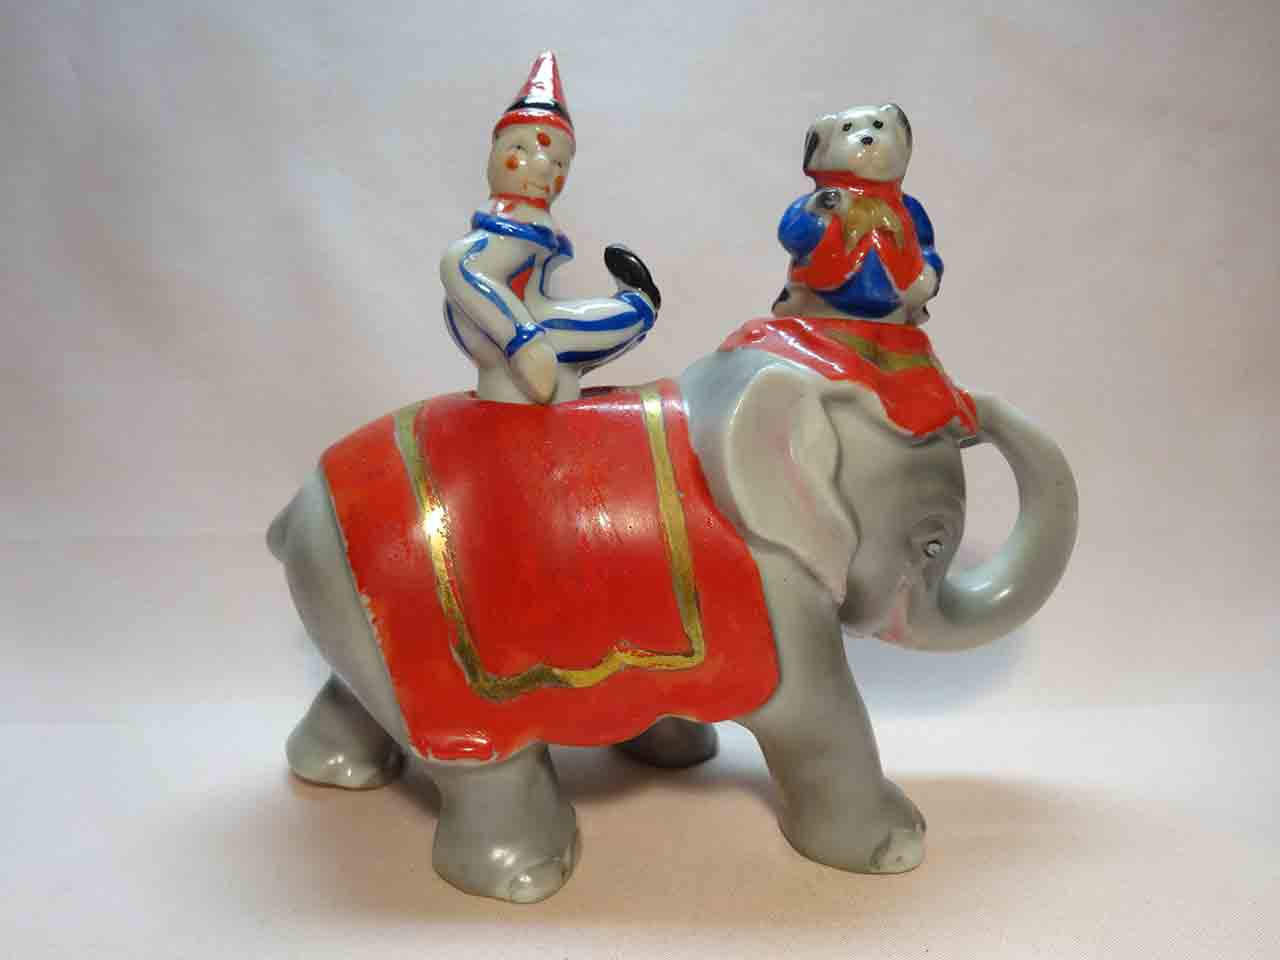 Walking elephant nodder with circus clown and dog as salt and pepper shakers